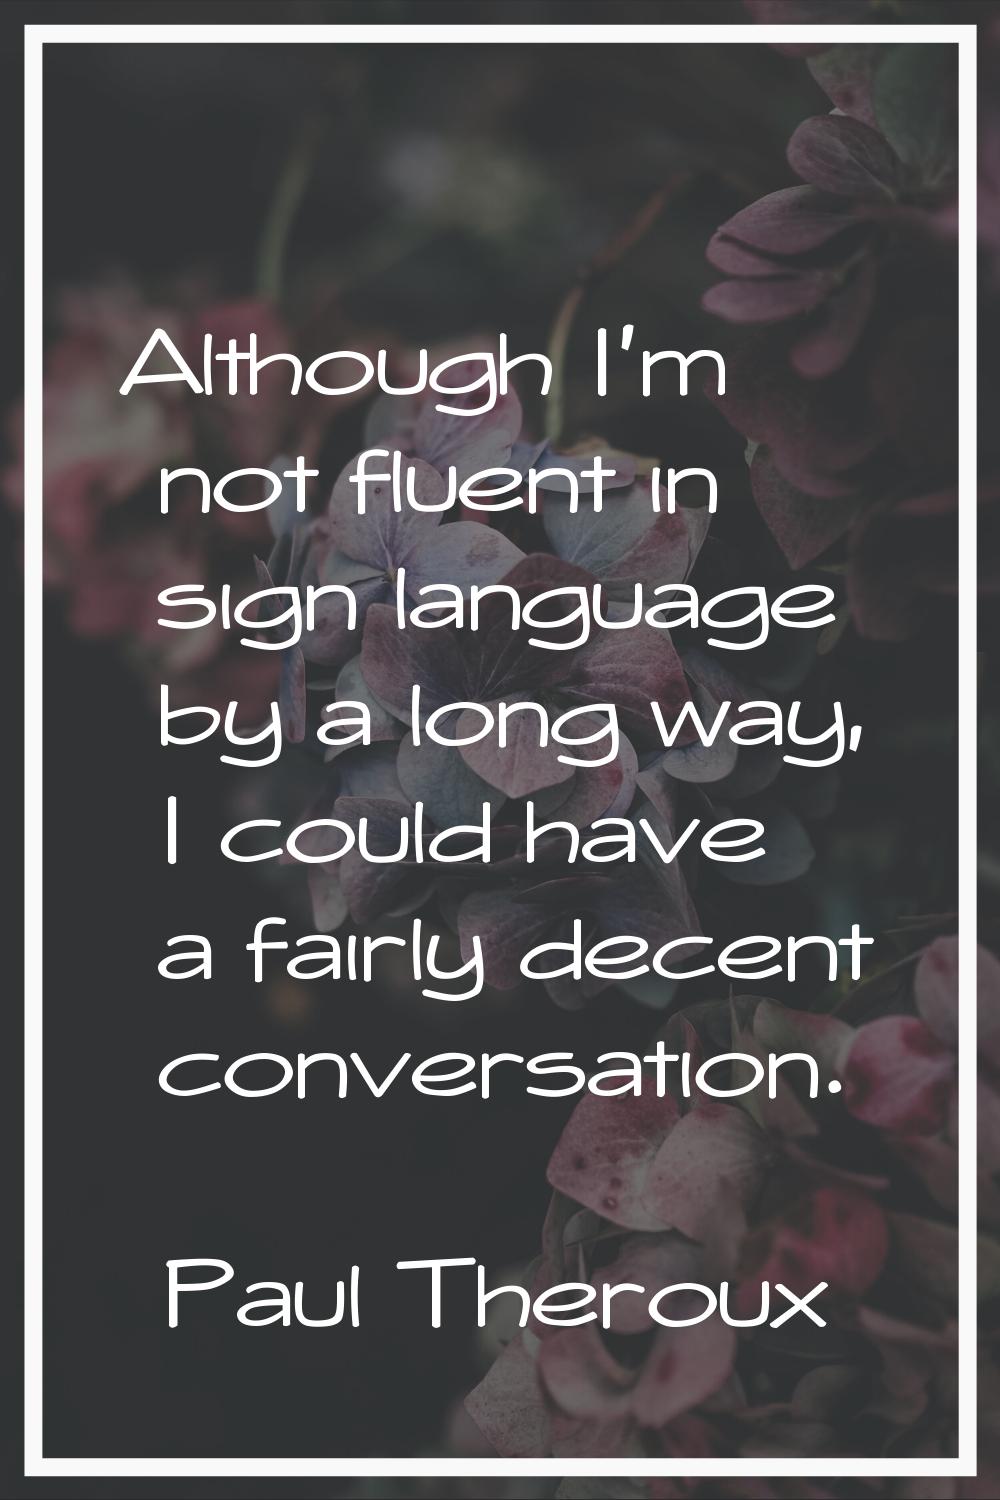 Although I'm not fluent in sign language by a long way, I could have a fairly decent conversation.